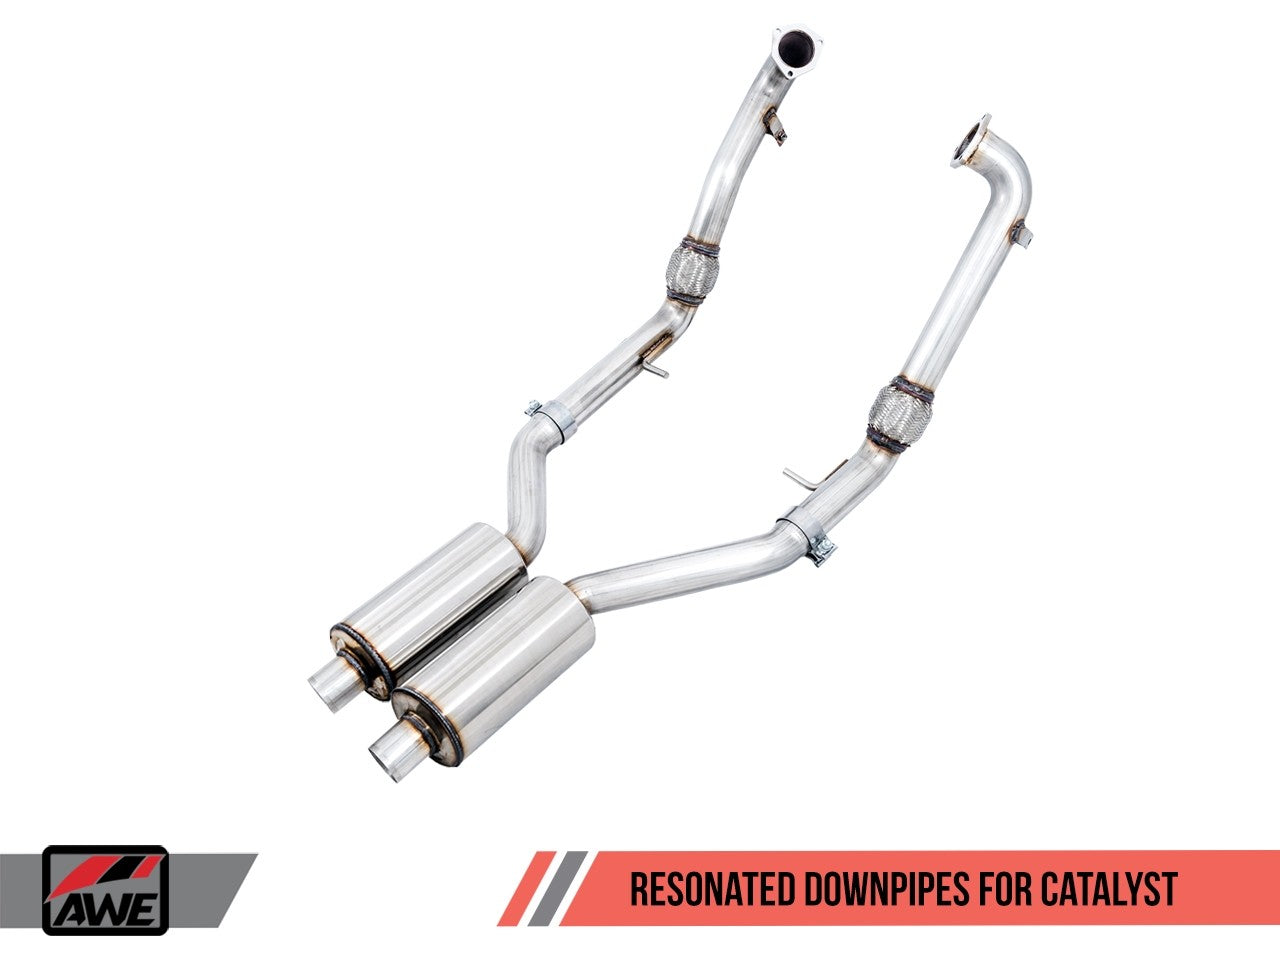 AWE SwitchPath™ Exhaust for Audi B9 S5 Coupe - Non-Resonated - Motorsports LA